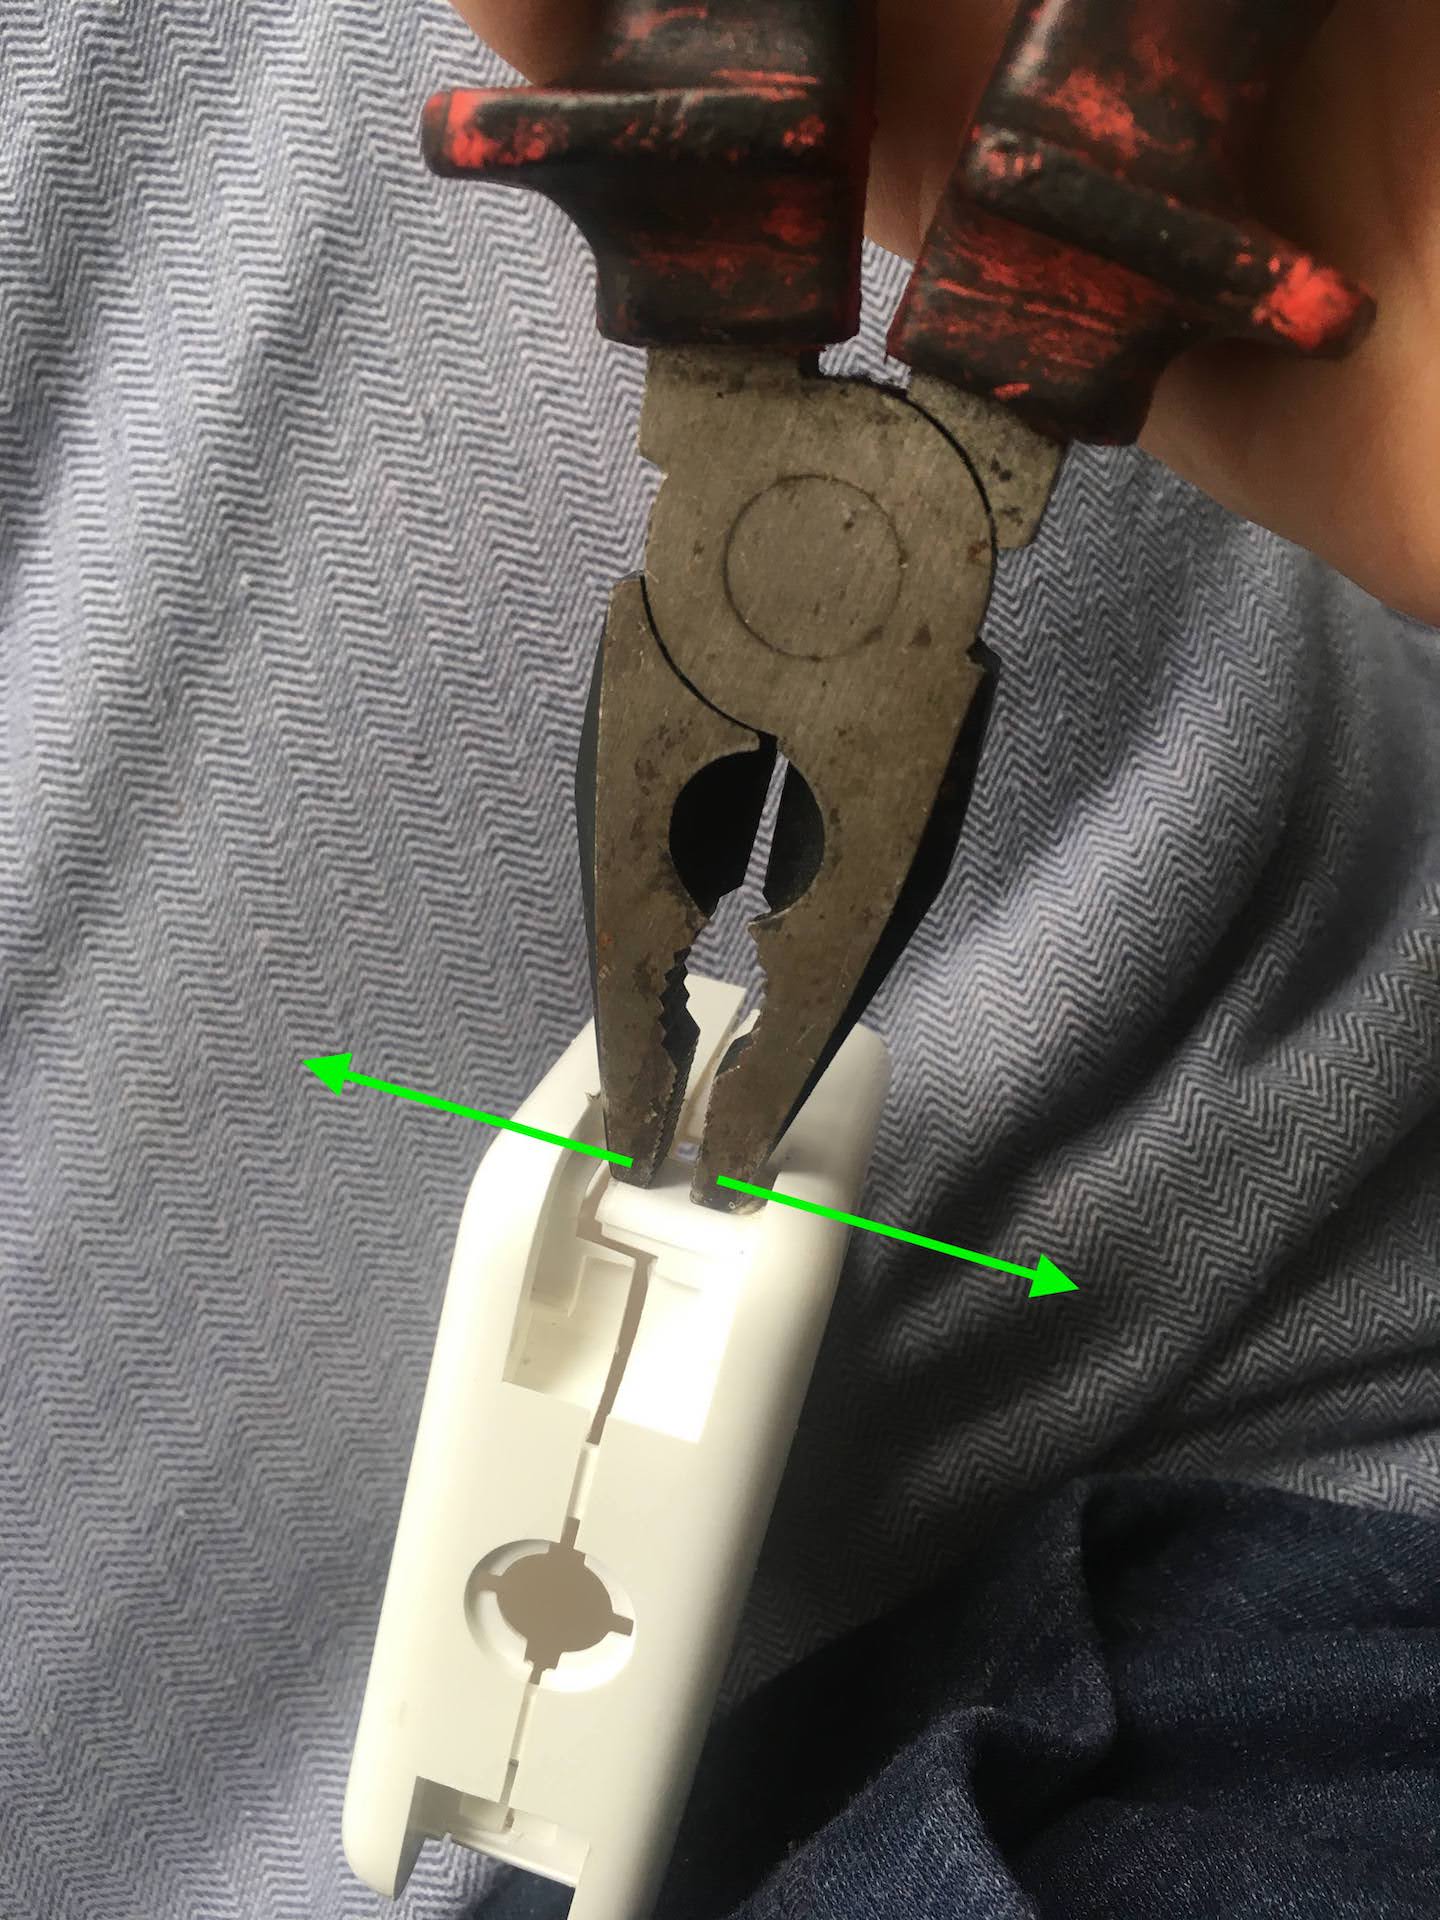 Using flat head pliers to open a MacBook Charger